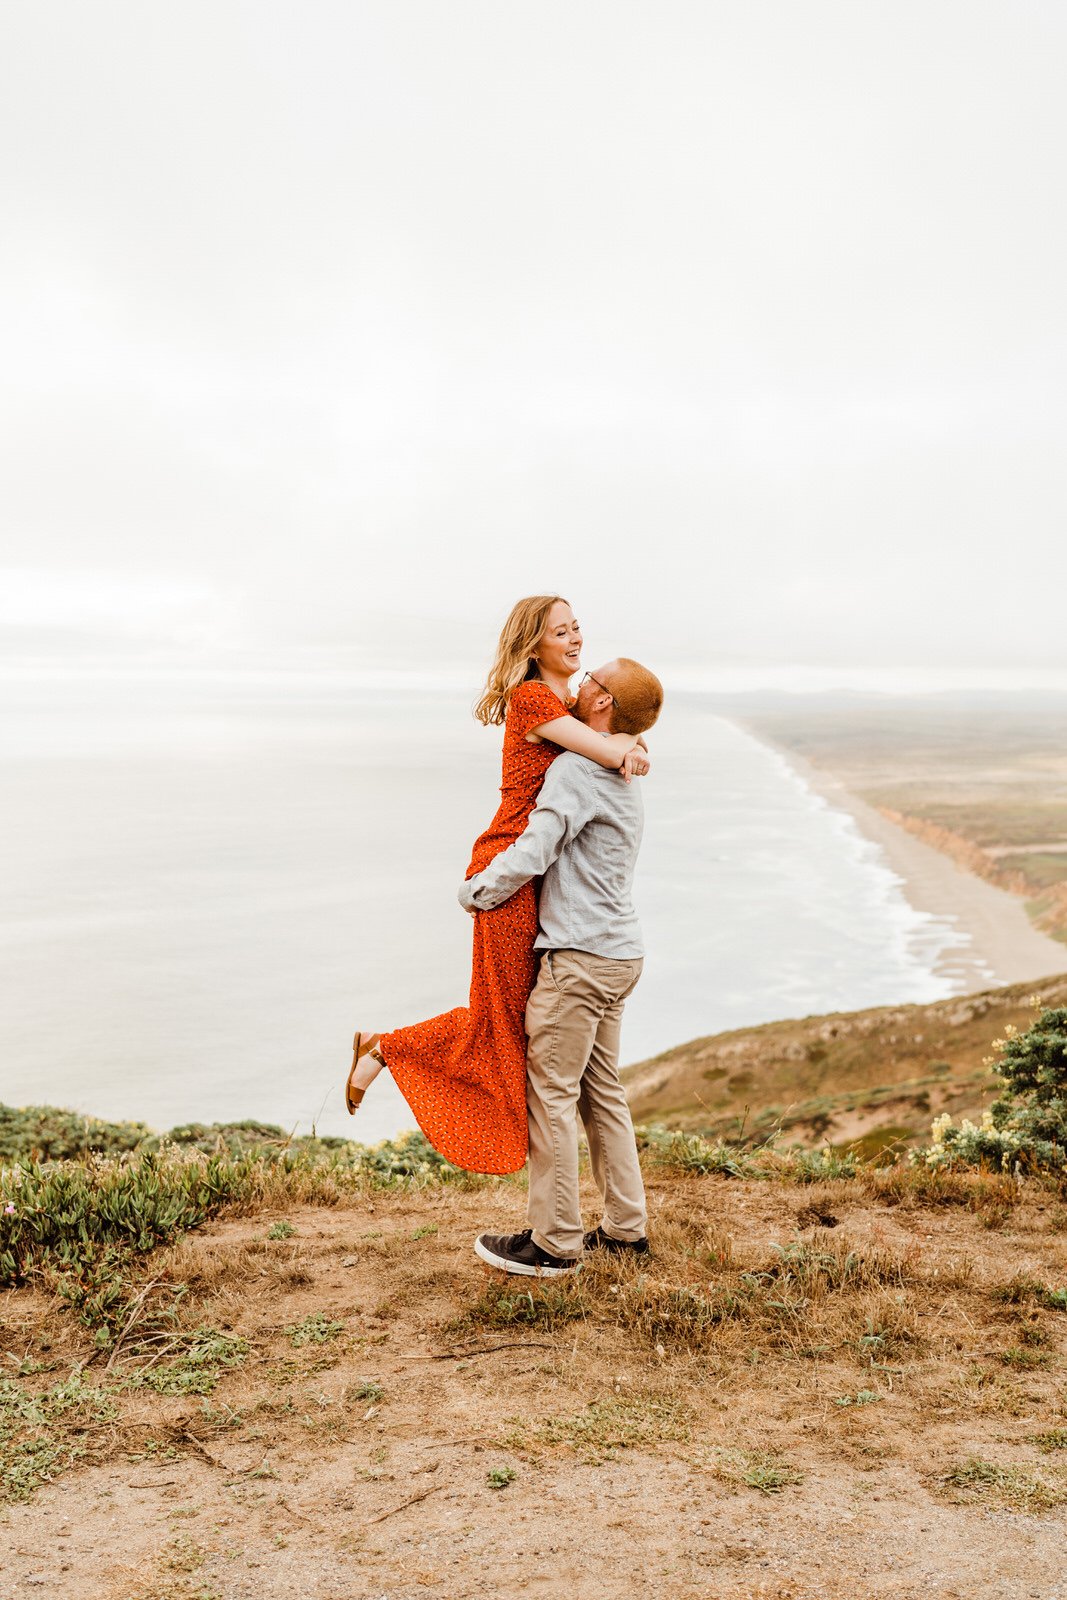 Ireland-inspired Point Reyes engagement | Engagement Outfits | Windy, romantic, adventurous photos | Kept Record | www.keptrecord.com